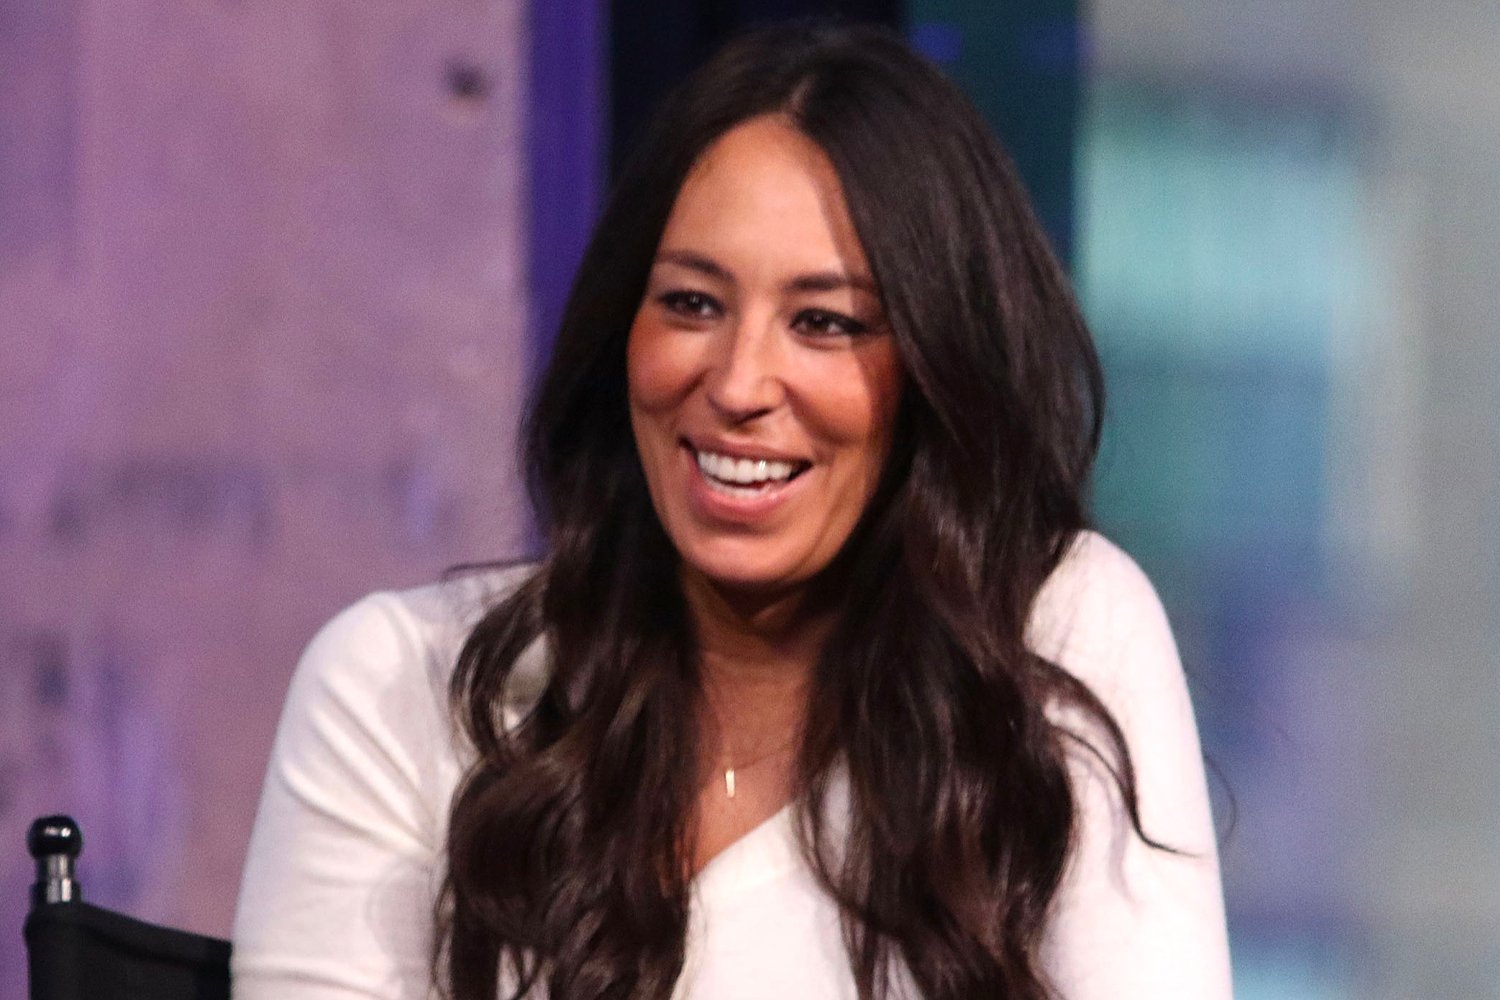 Joanna Gaines smiling during an interview